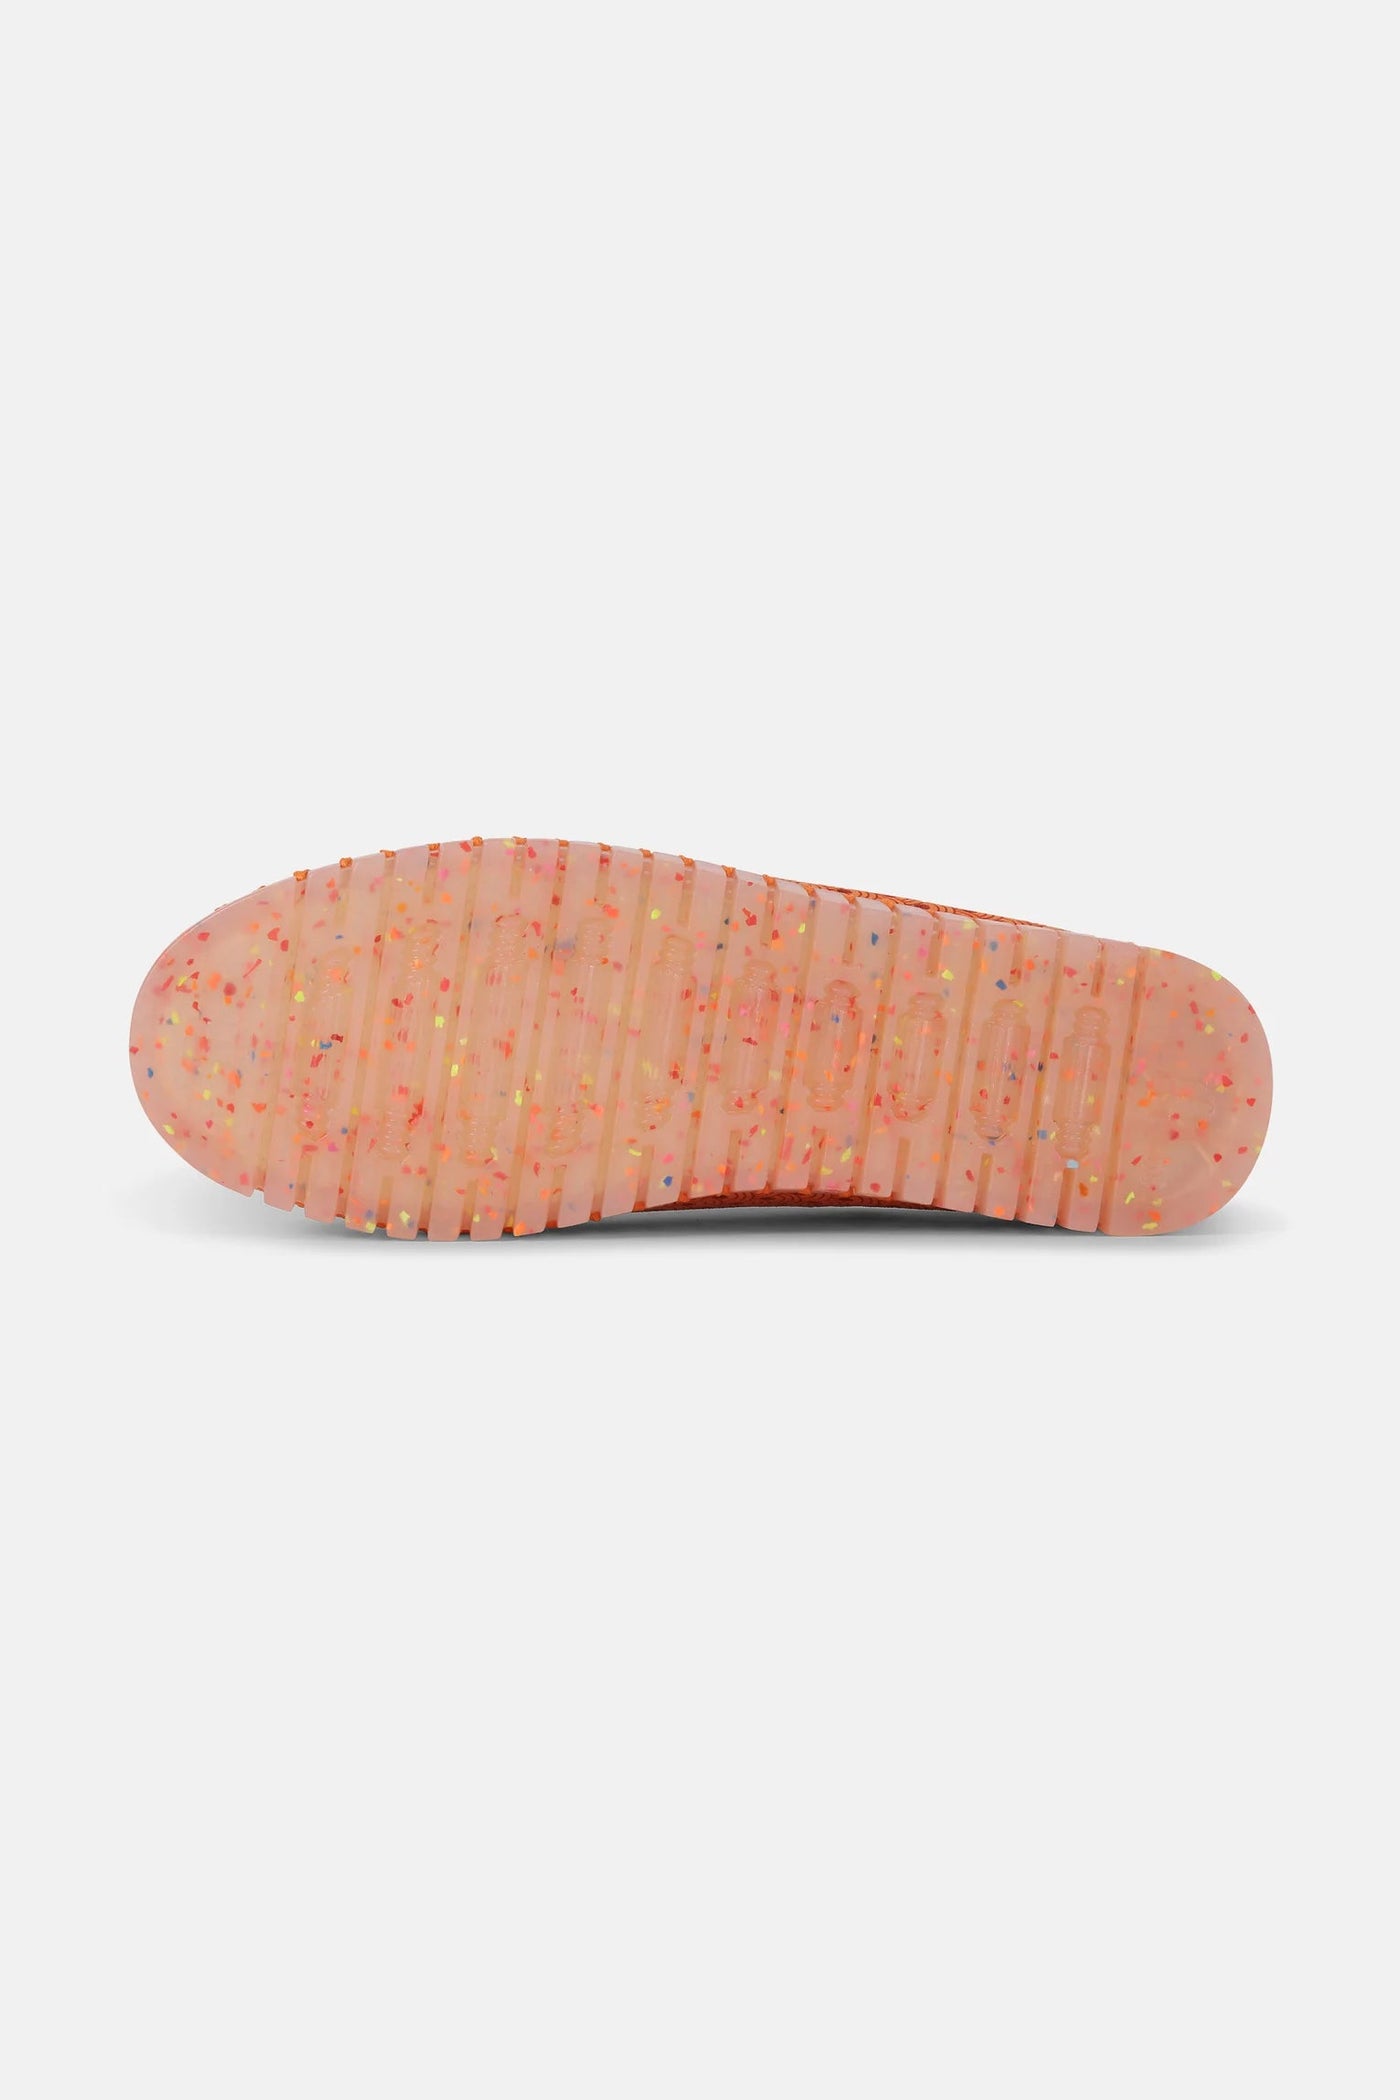 Ilse Jacobsen Flats Speckled Sole - Camelia-Accessories-Ohh! By Gum - Shop Sustainable